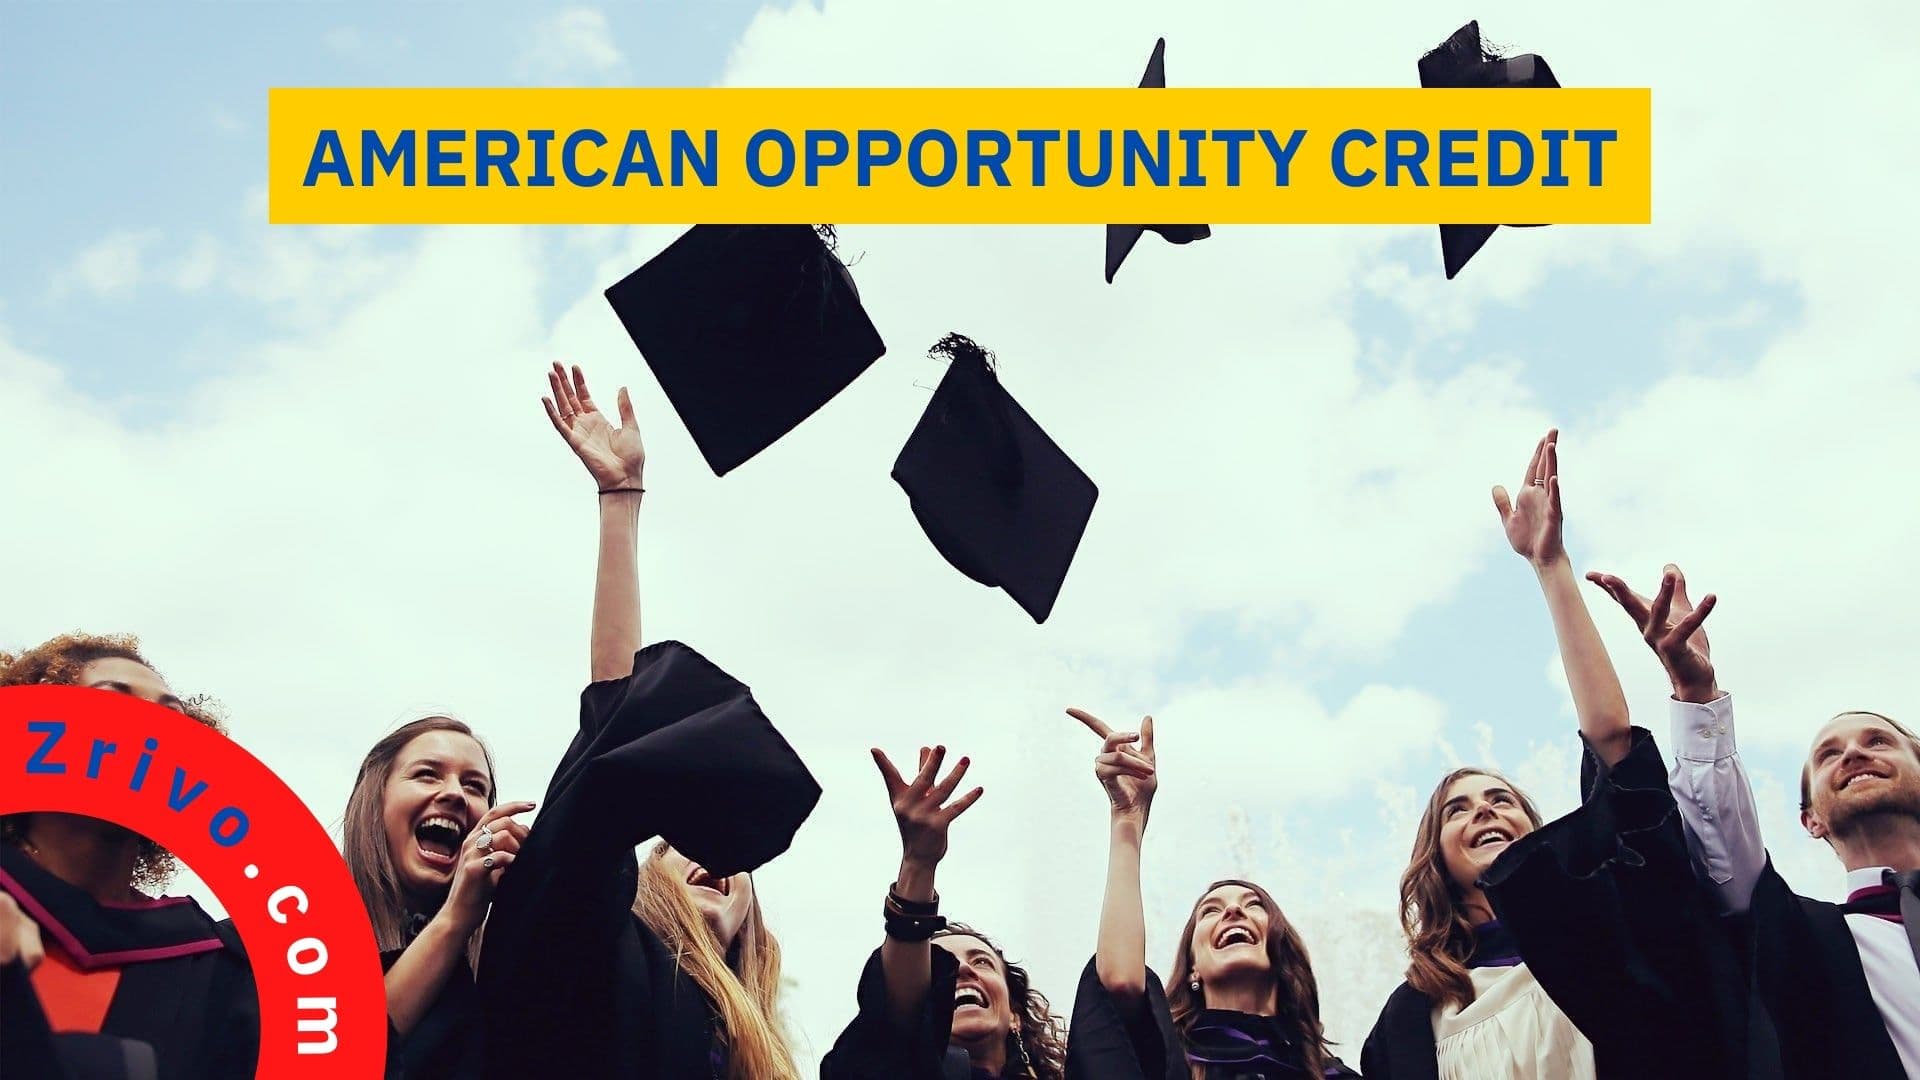 American Opportunity Credit